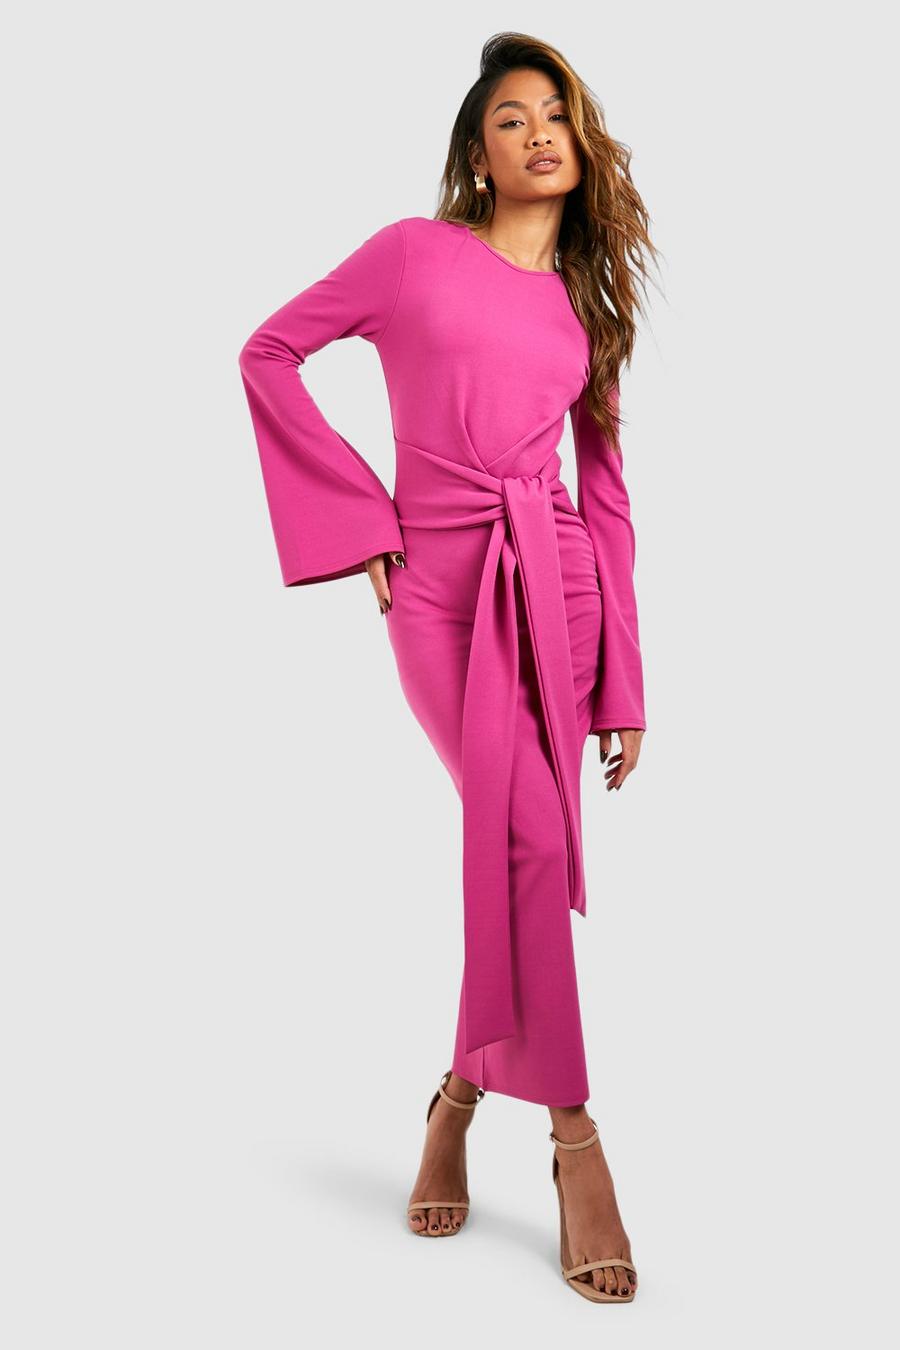 Magenta Knot Front Flared Sleeve Crepe Midaxi Dress